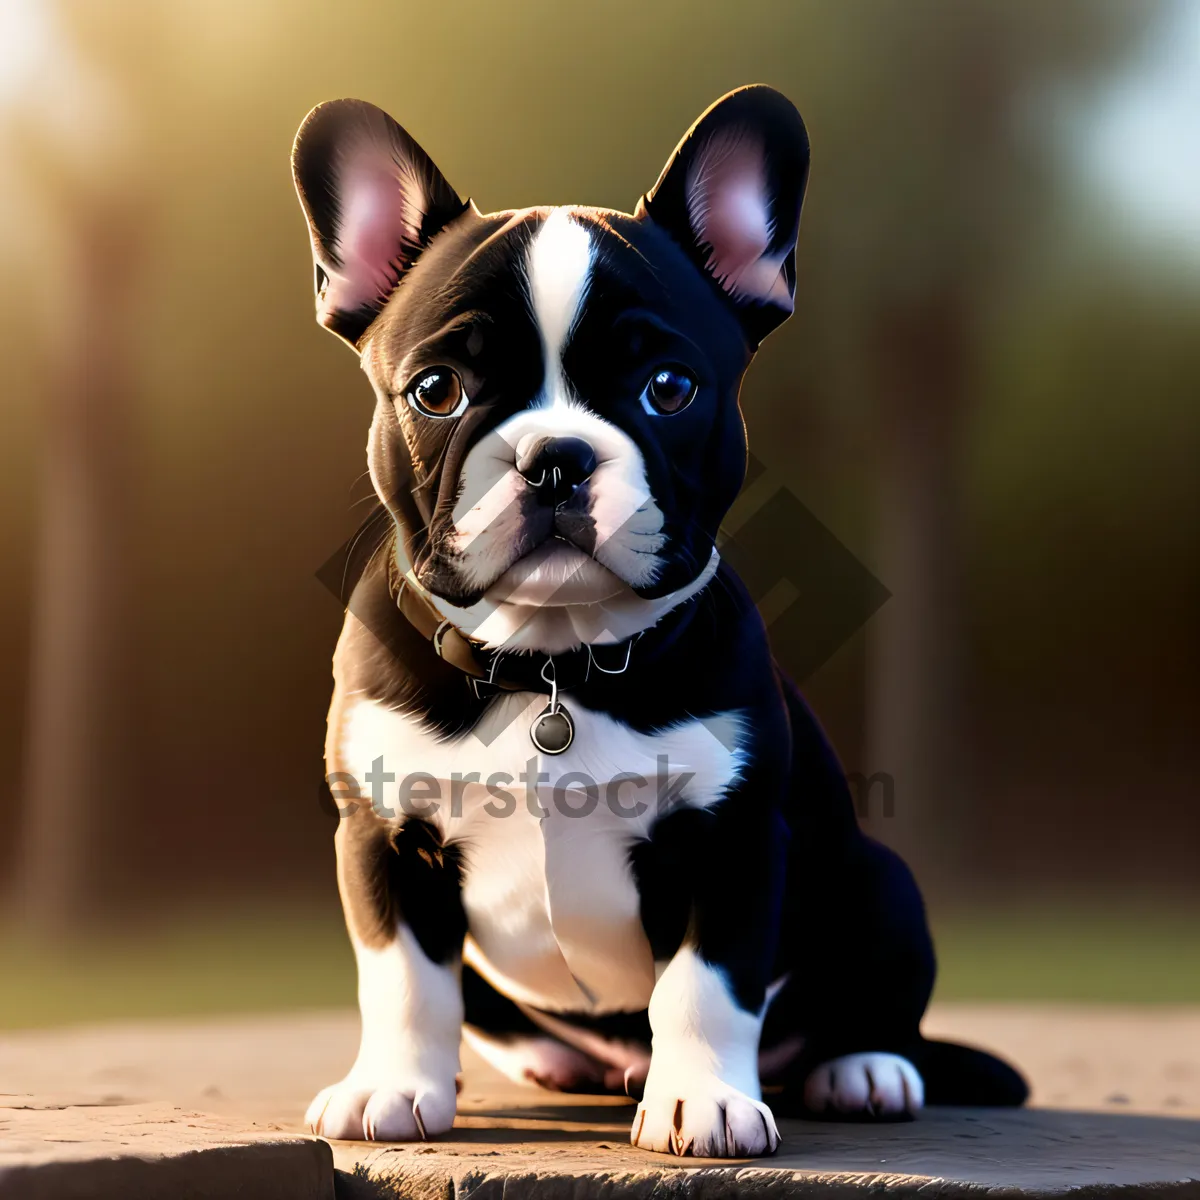 Picture of Meet an endearing bulldog puppy, a purebred canine companion that will steal your heart